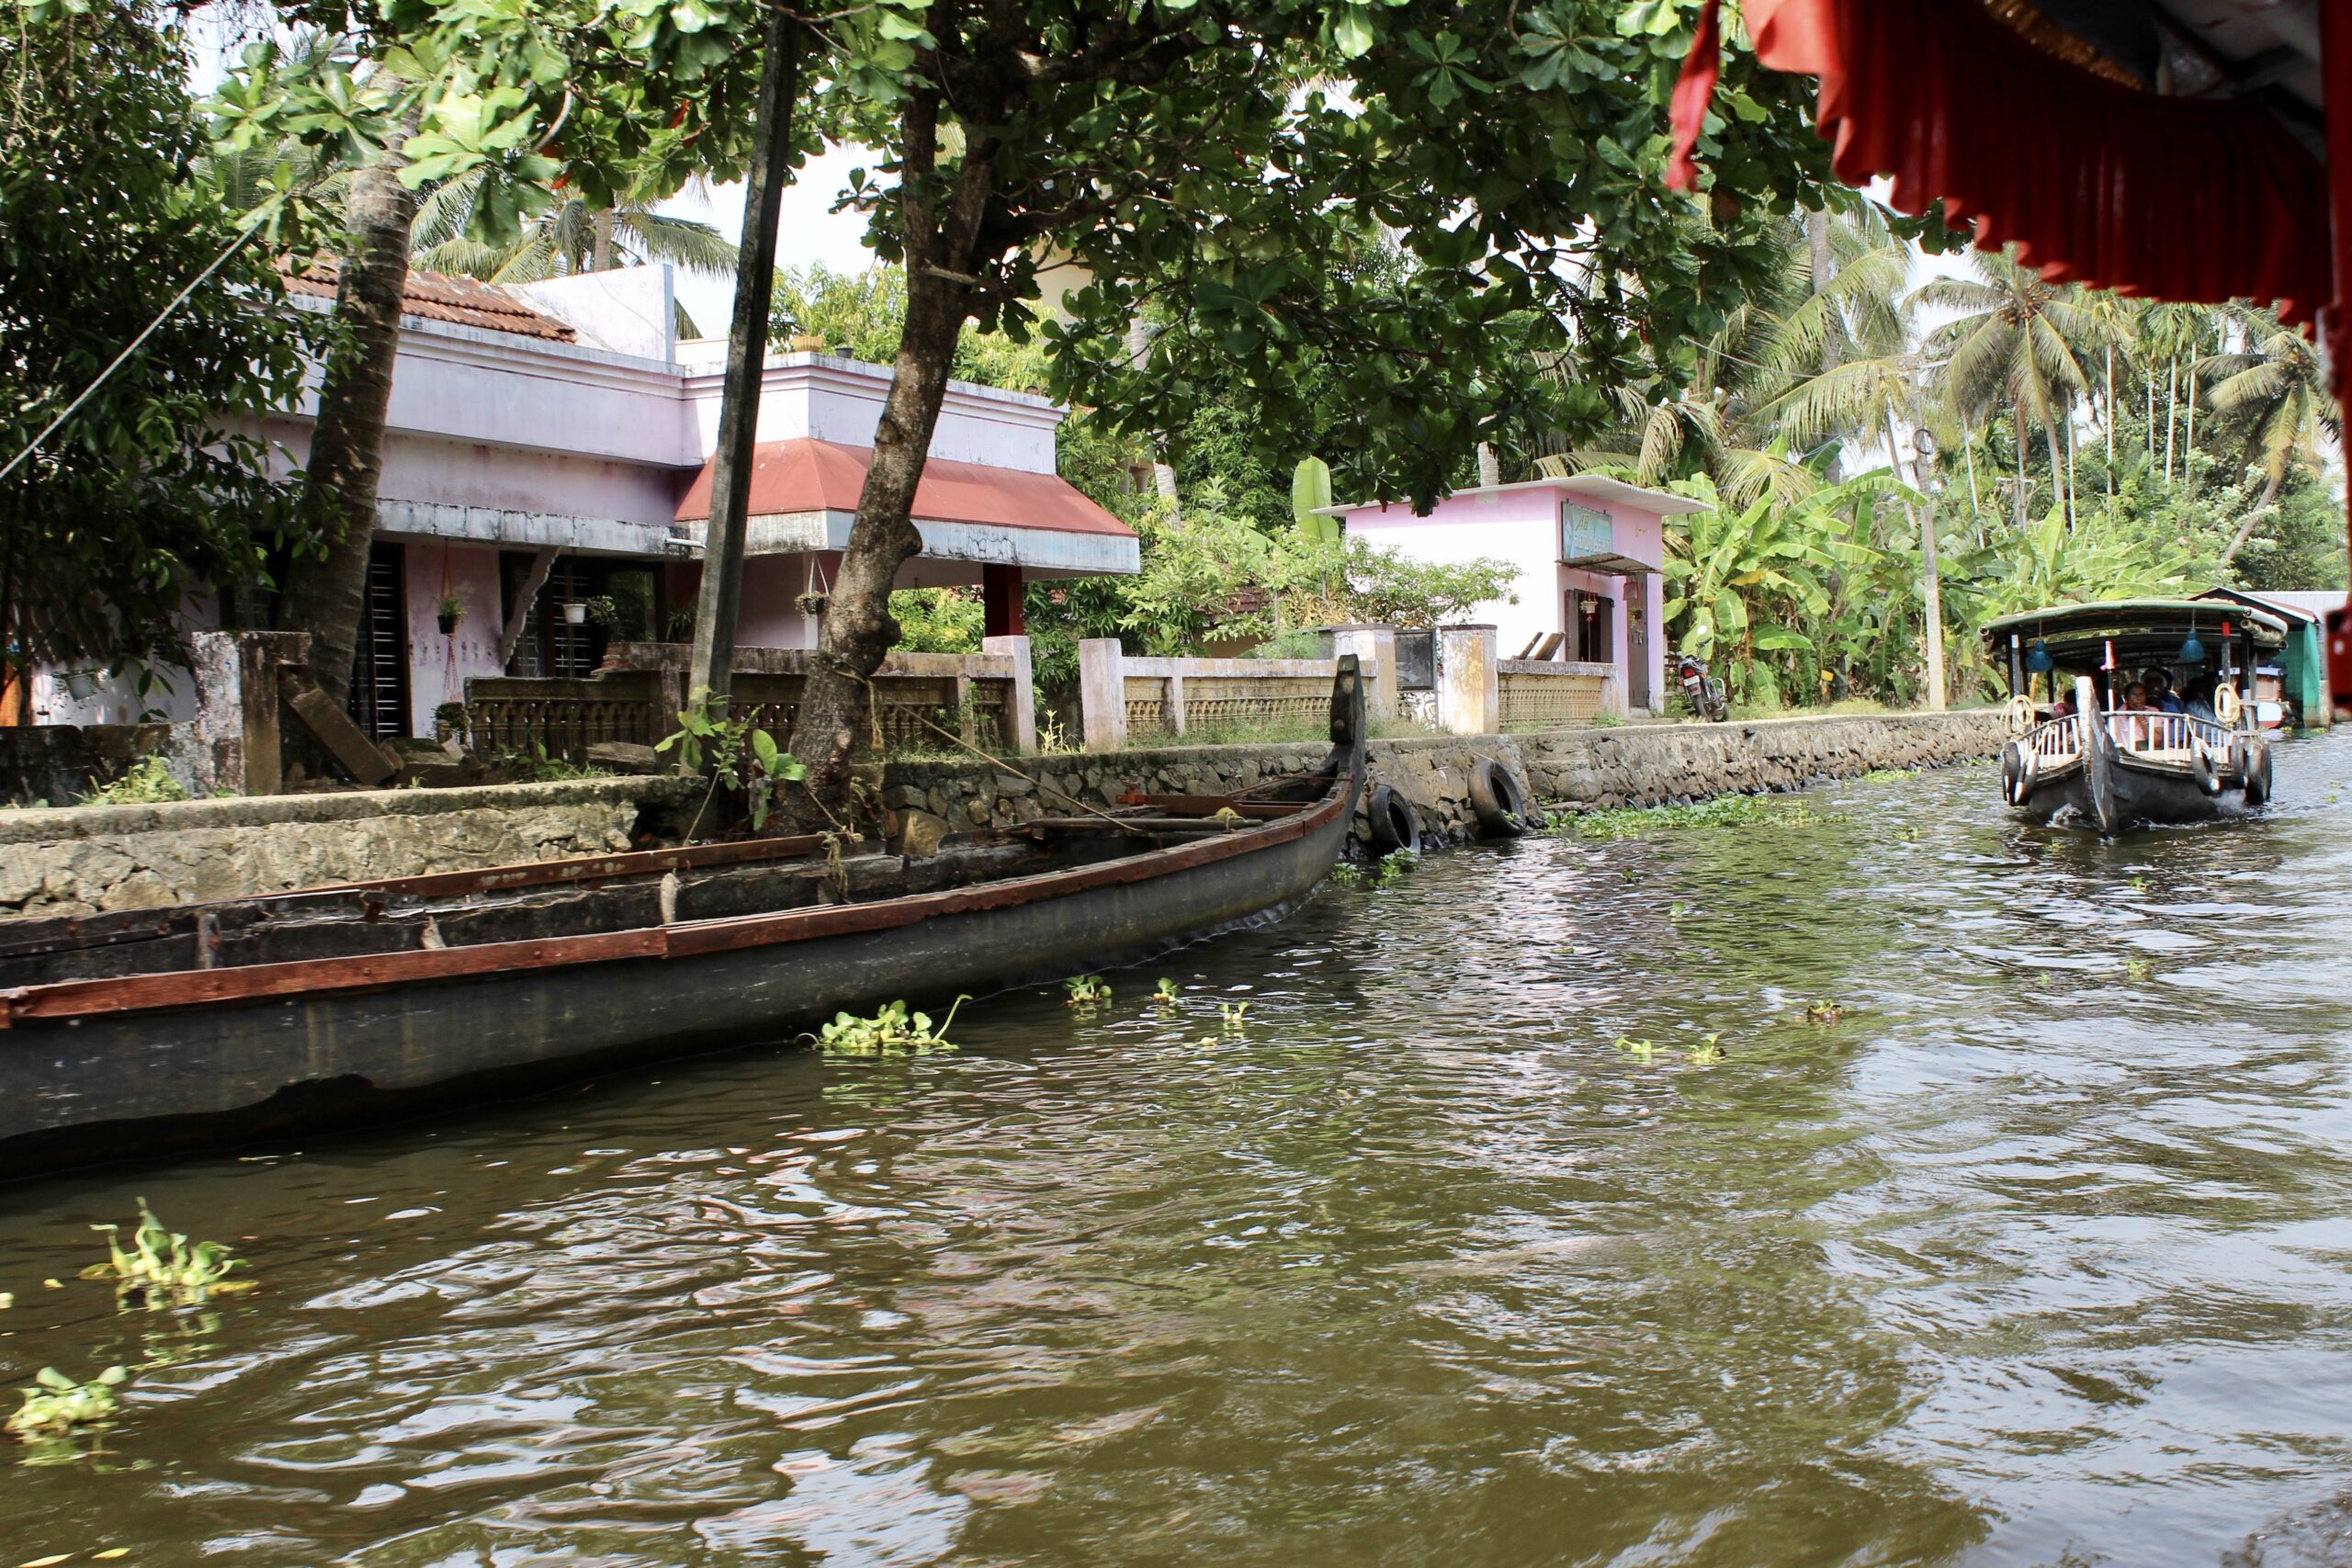 Shikara boats sailing over a canal in Alleppey